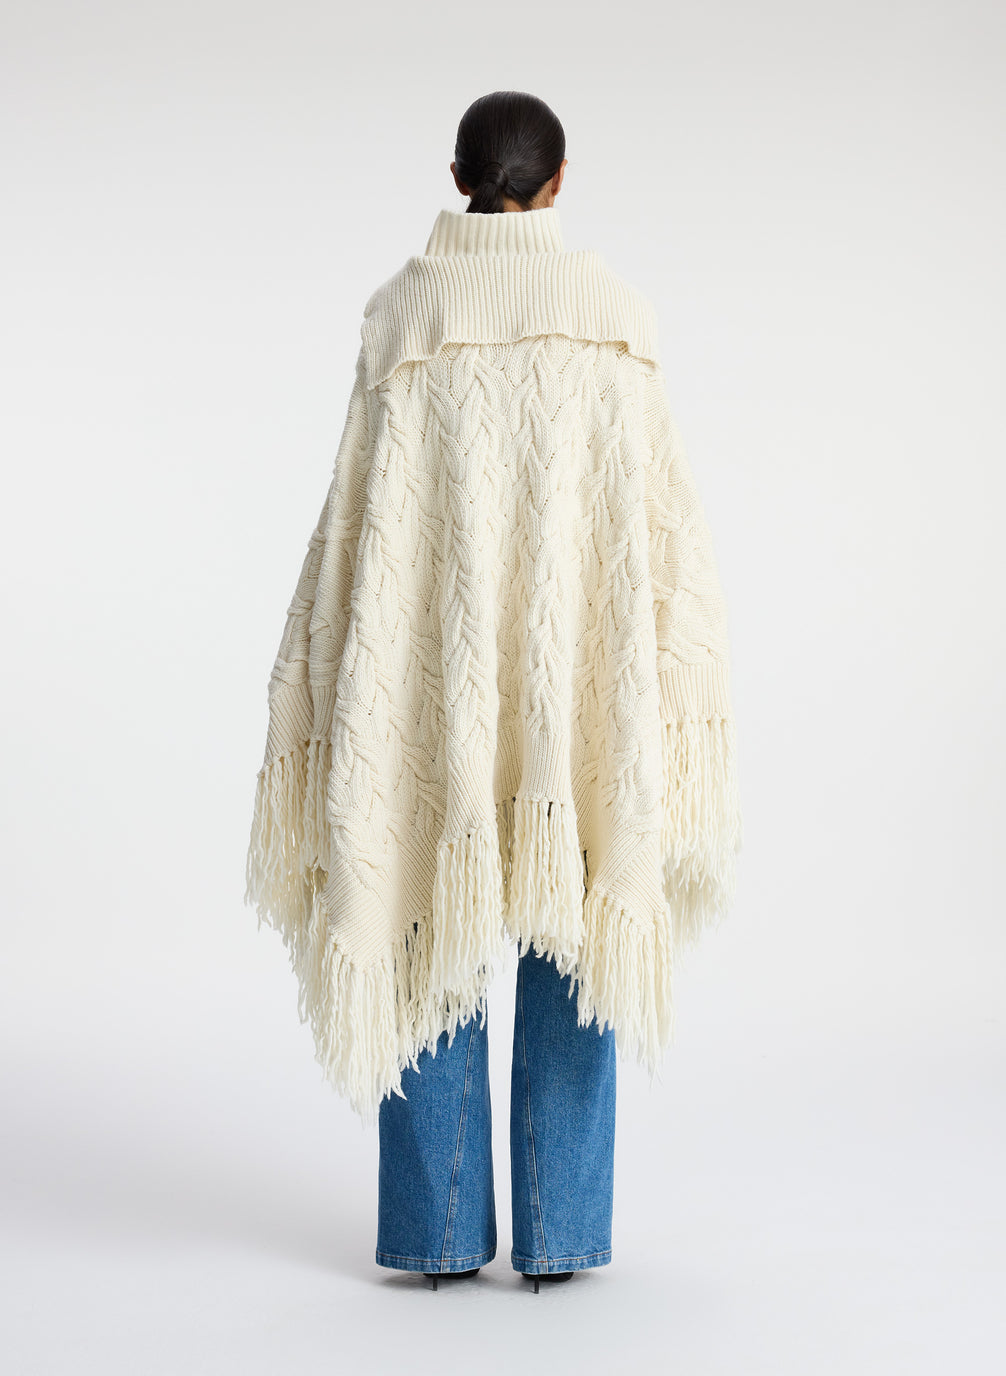 back view of woman wearing cream cable knit poncho with fringe